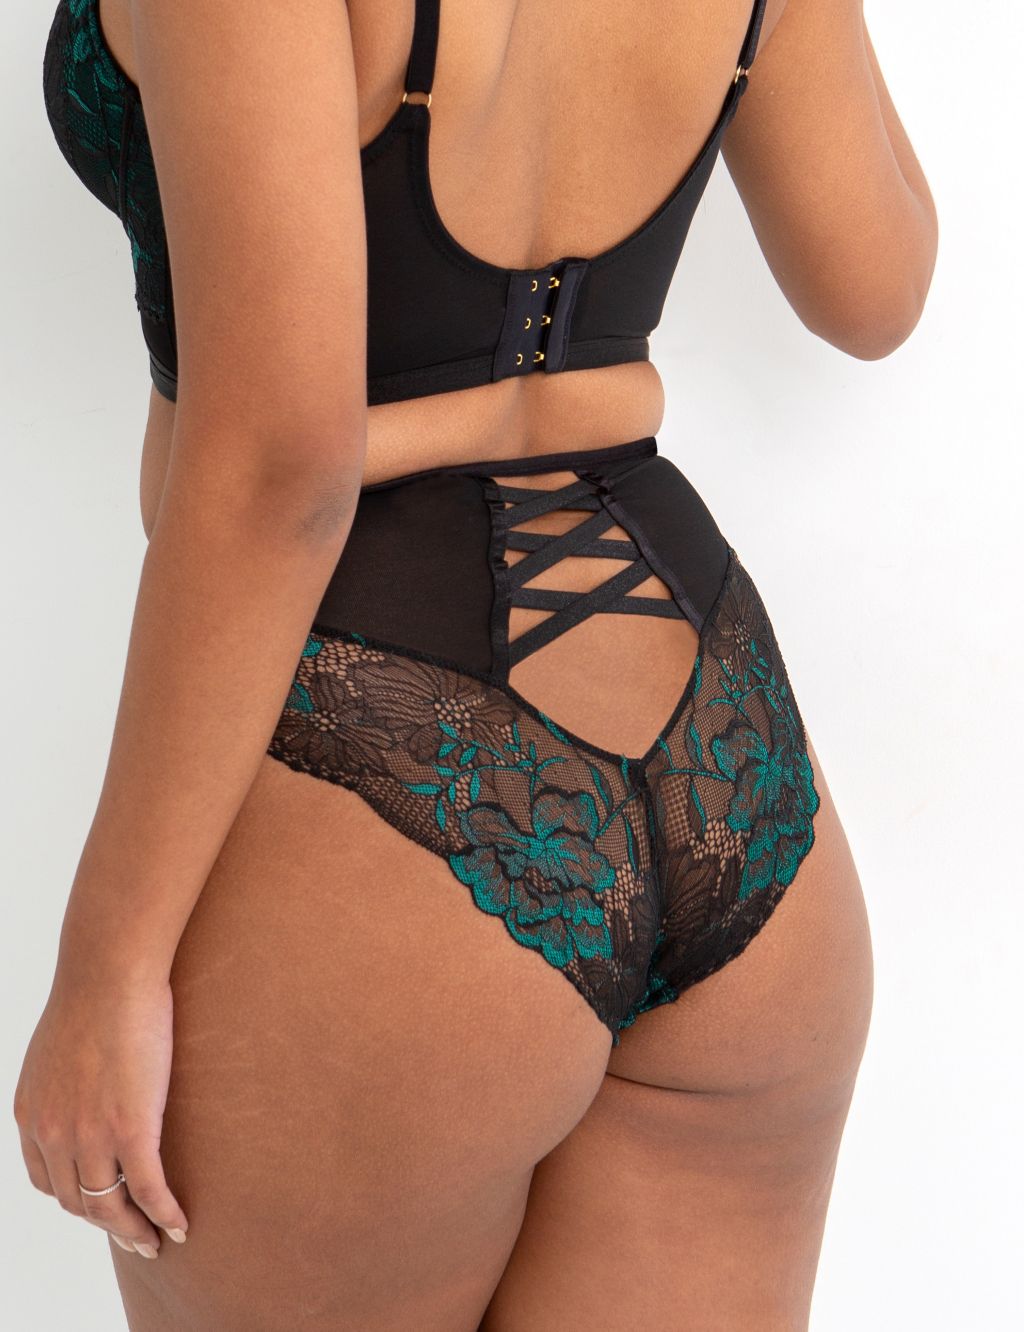 After Hours Lace High Waisted Full Briefs image 3